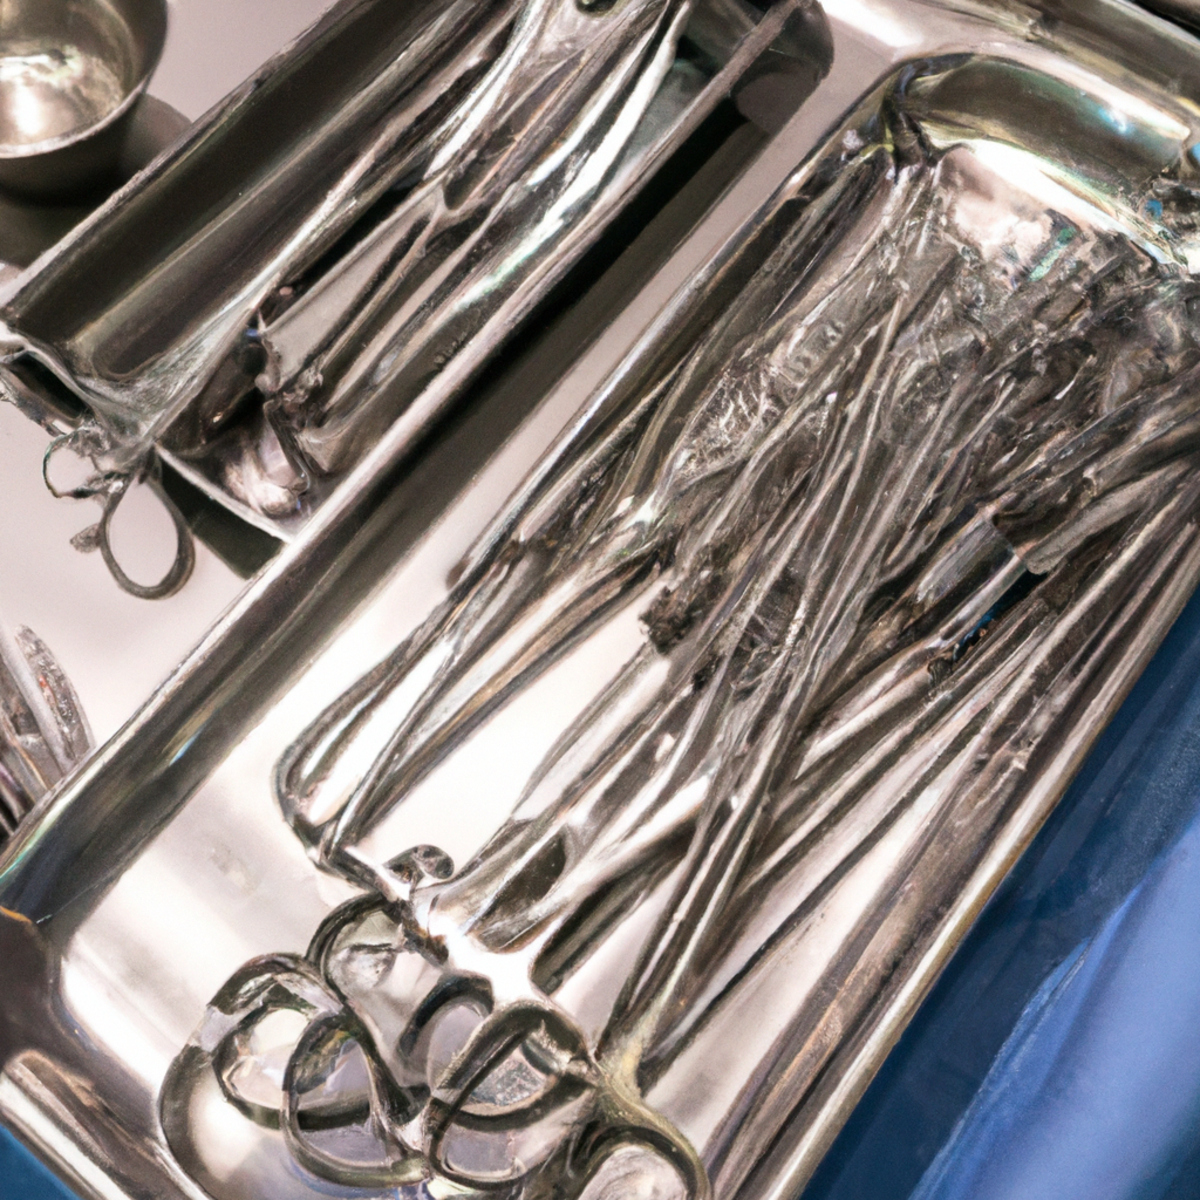 Surgical instrument tray with sterile tools and equipment, highlighting precision in treating gallbladder leiomyosarcoma.